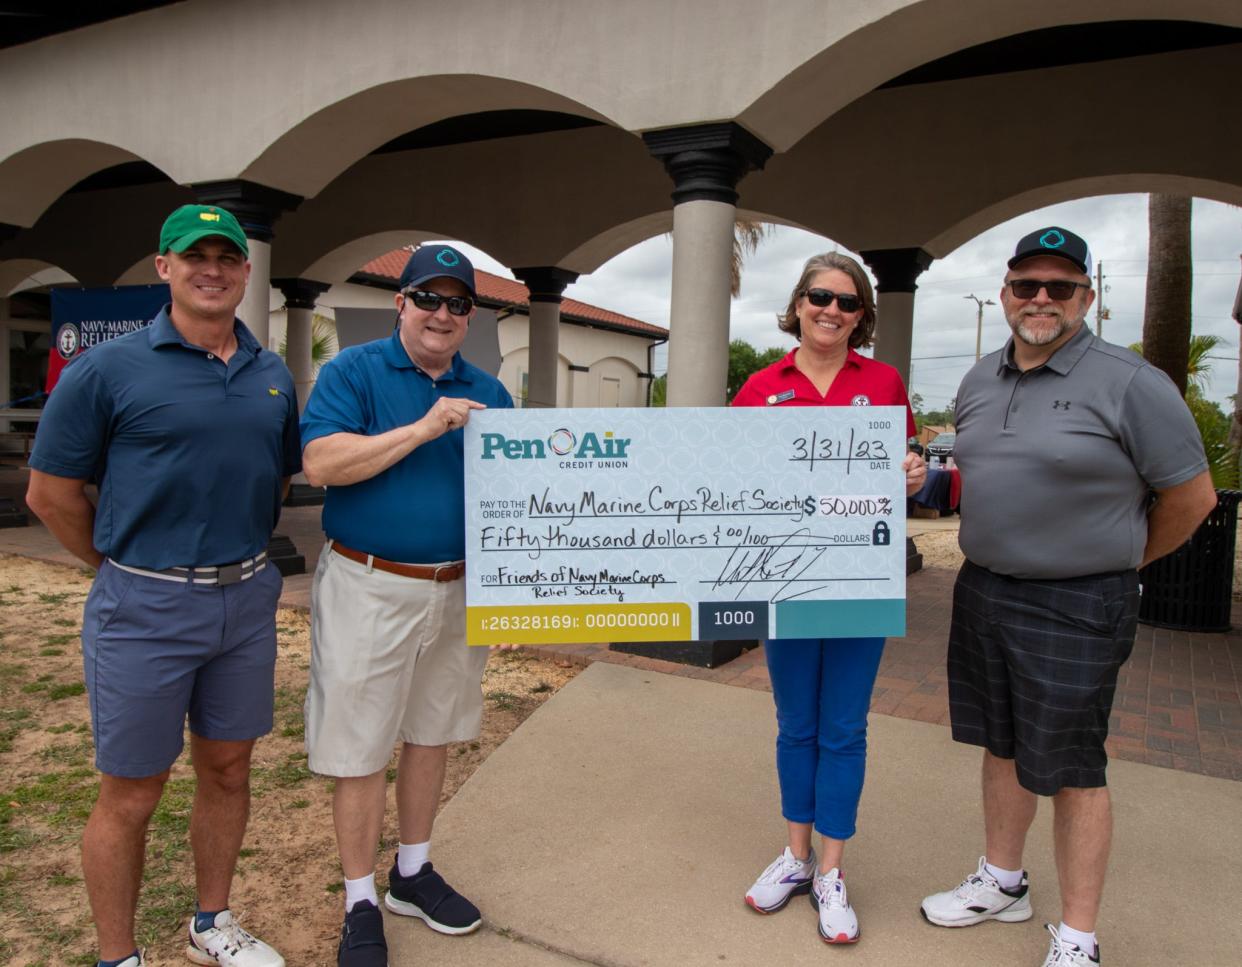 The Navy Marine-Corps. Relief Society scores $50,000 from the 23rd annual Charity Golf Tournament and Pen Air Credit Union.